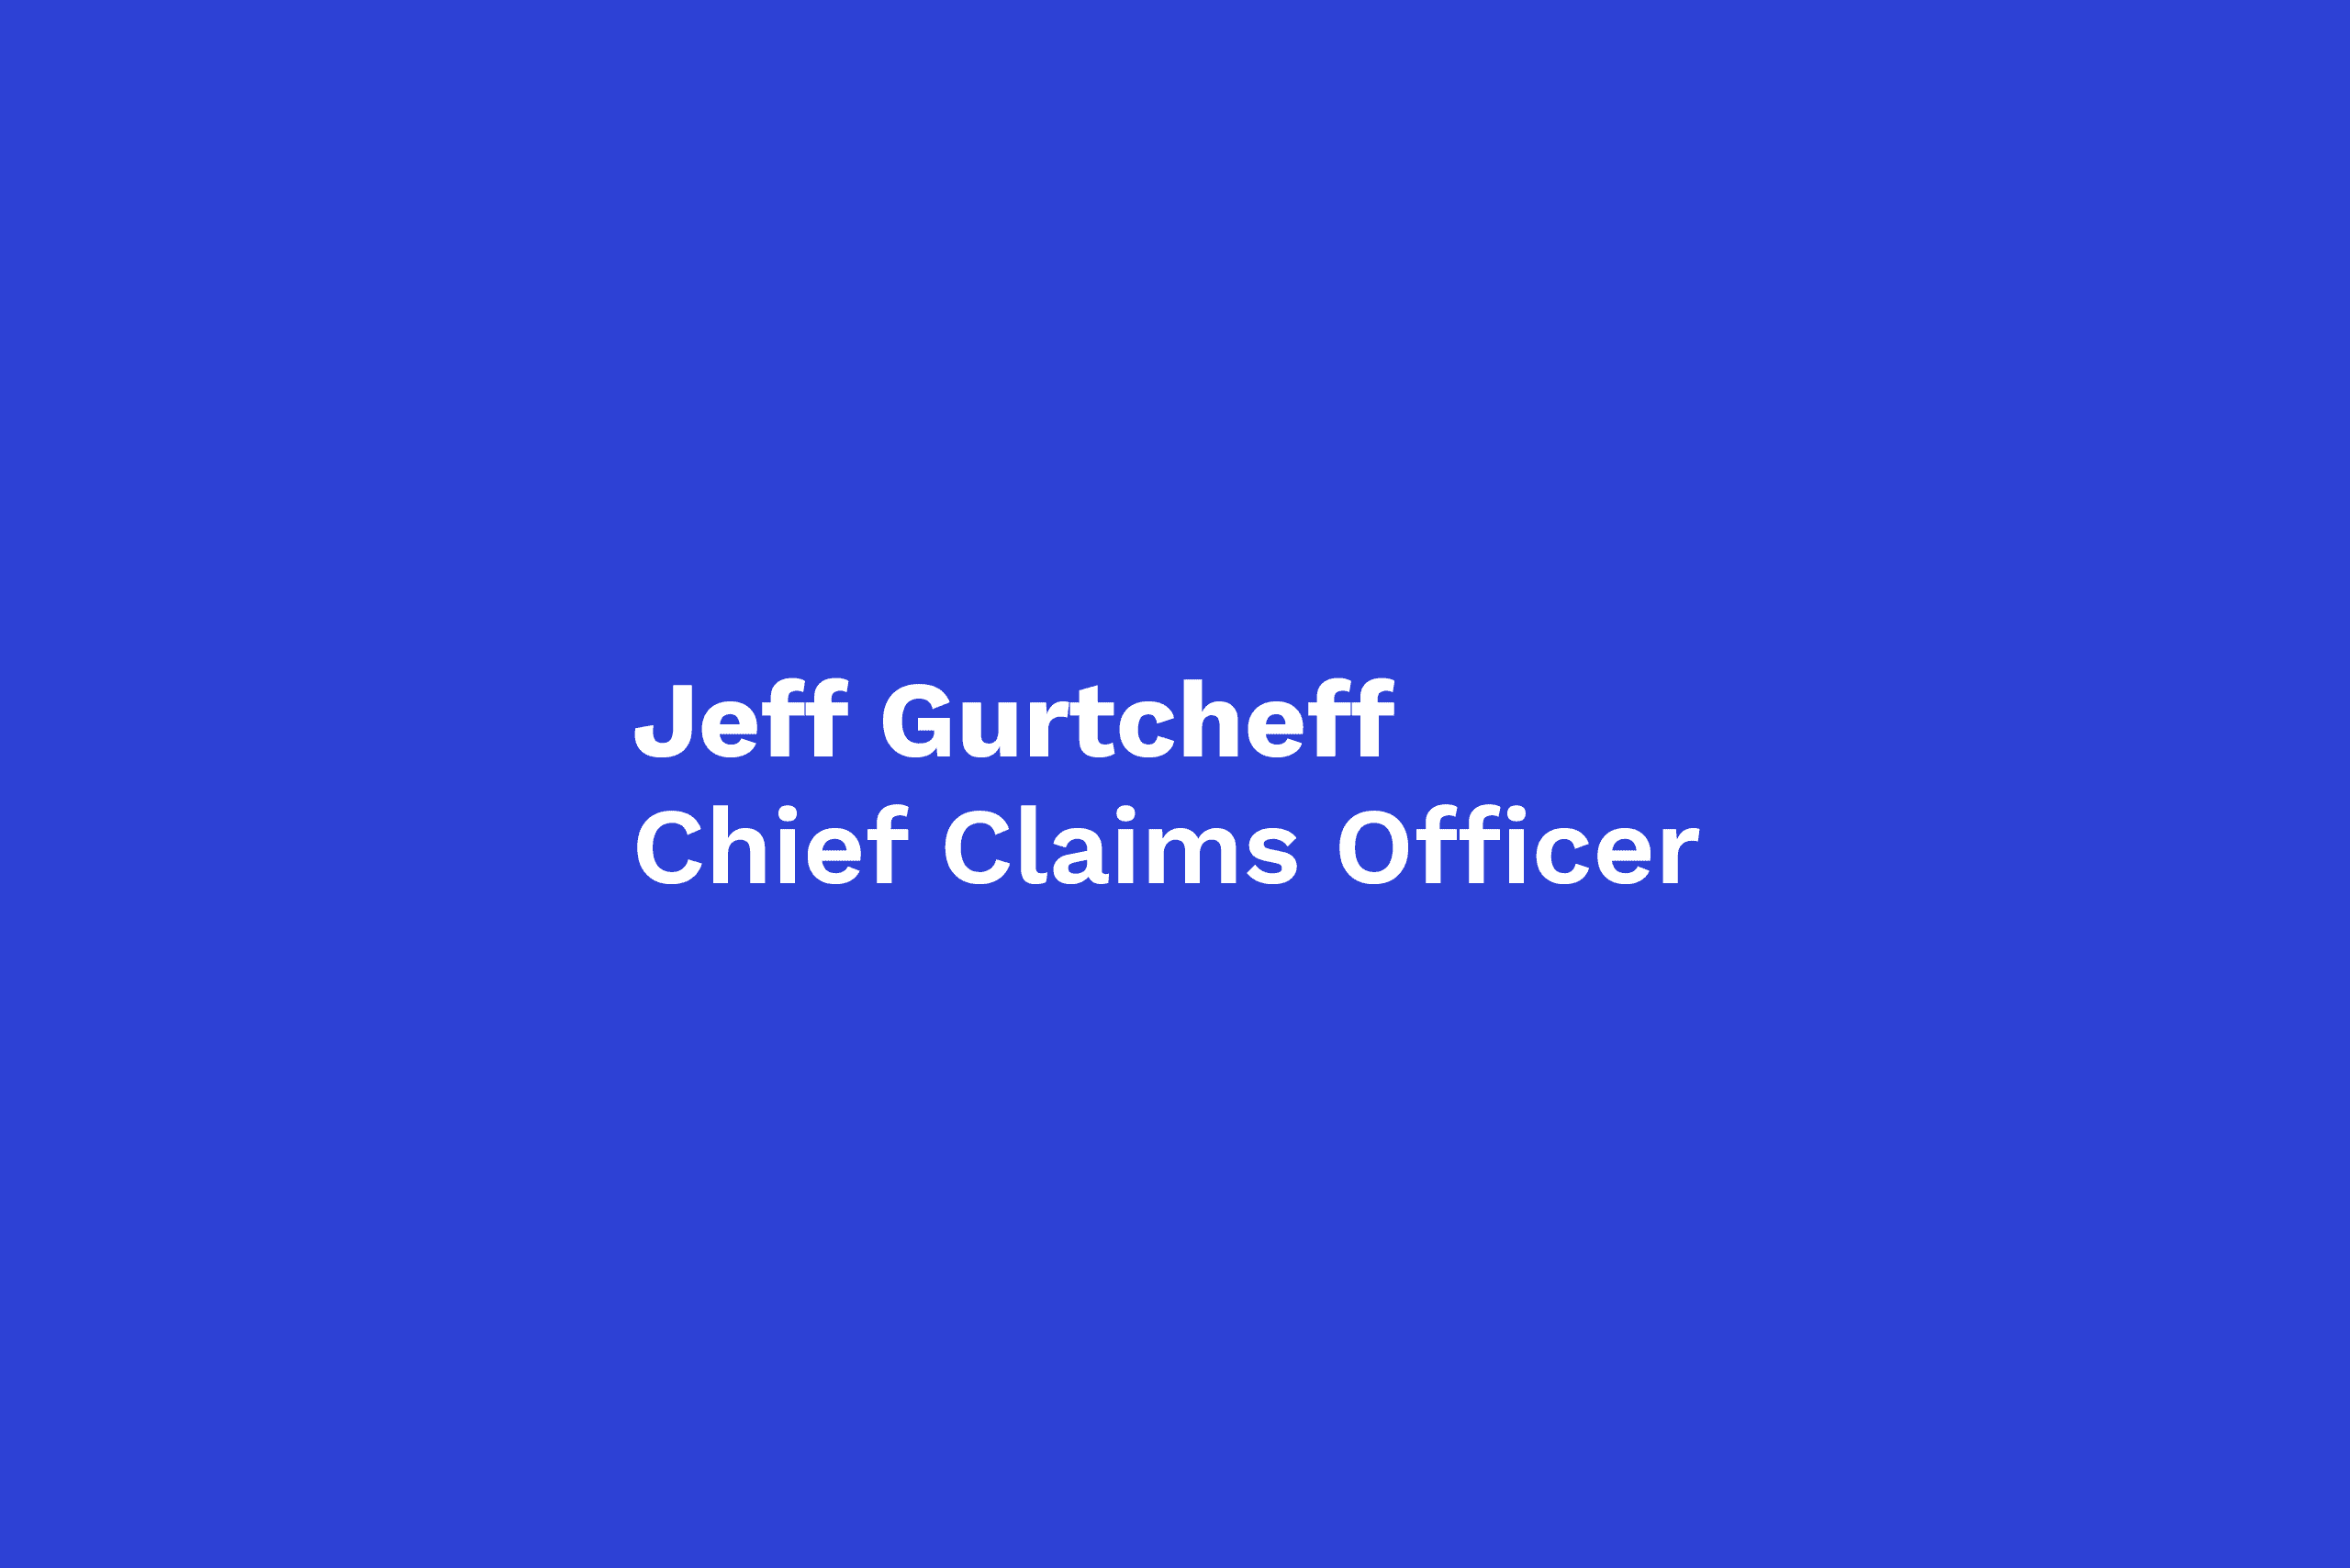 Jeff Gurtcheff Chief Claims Officer